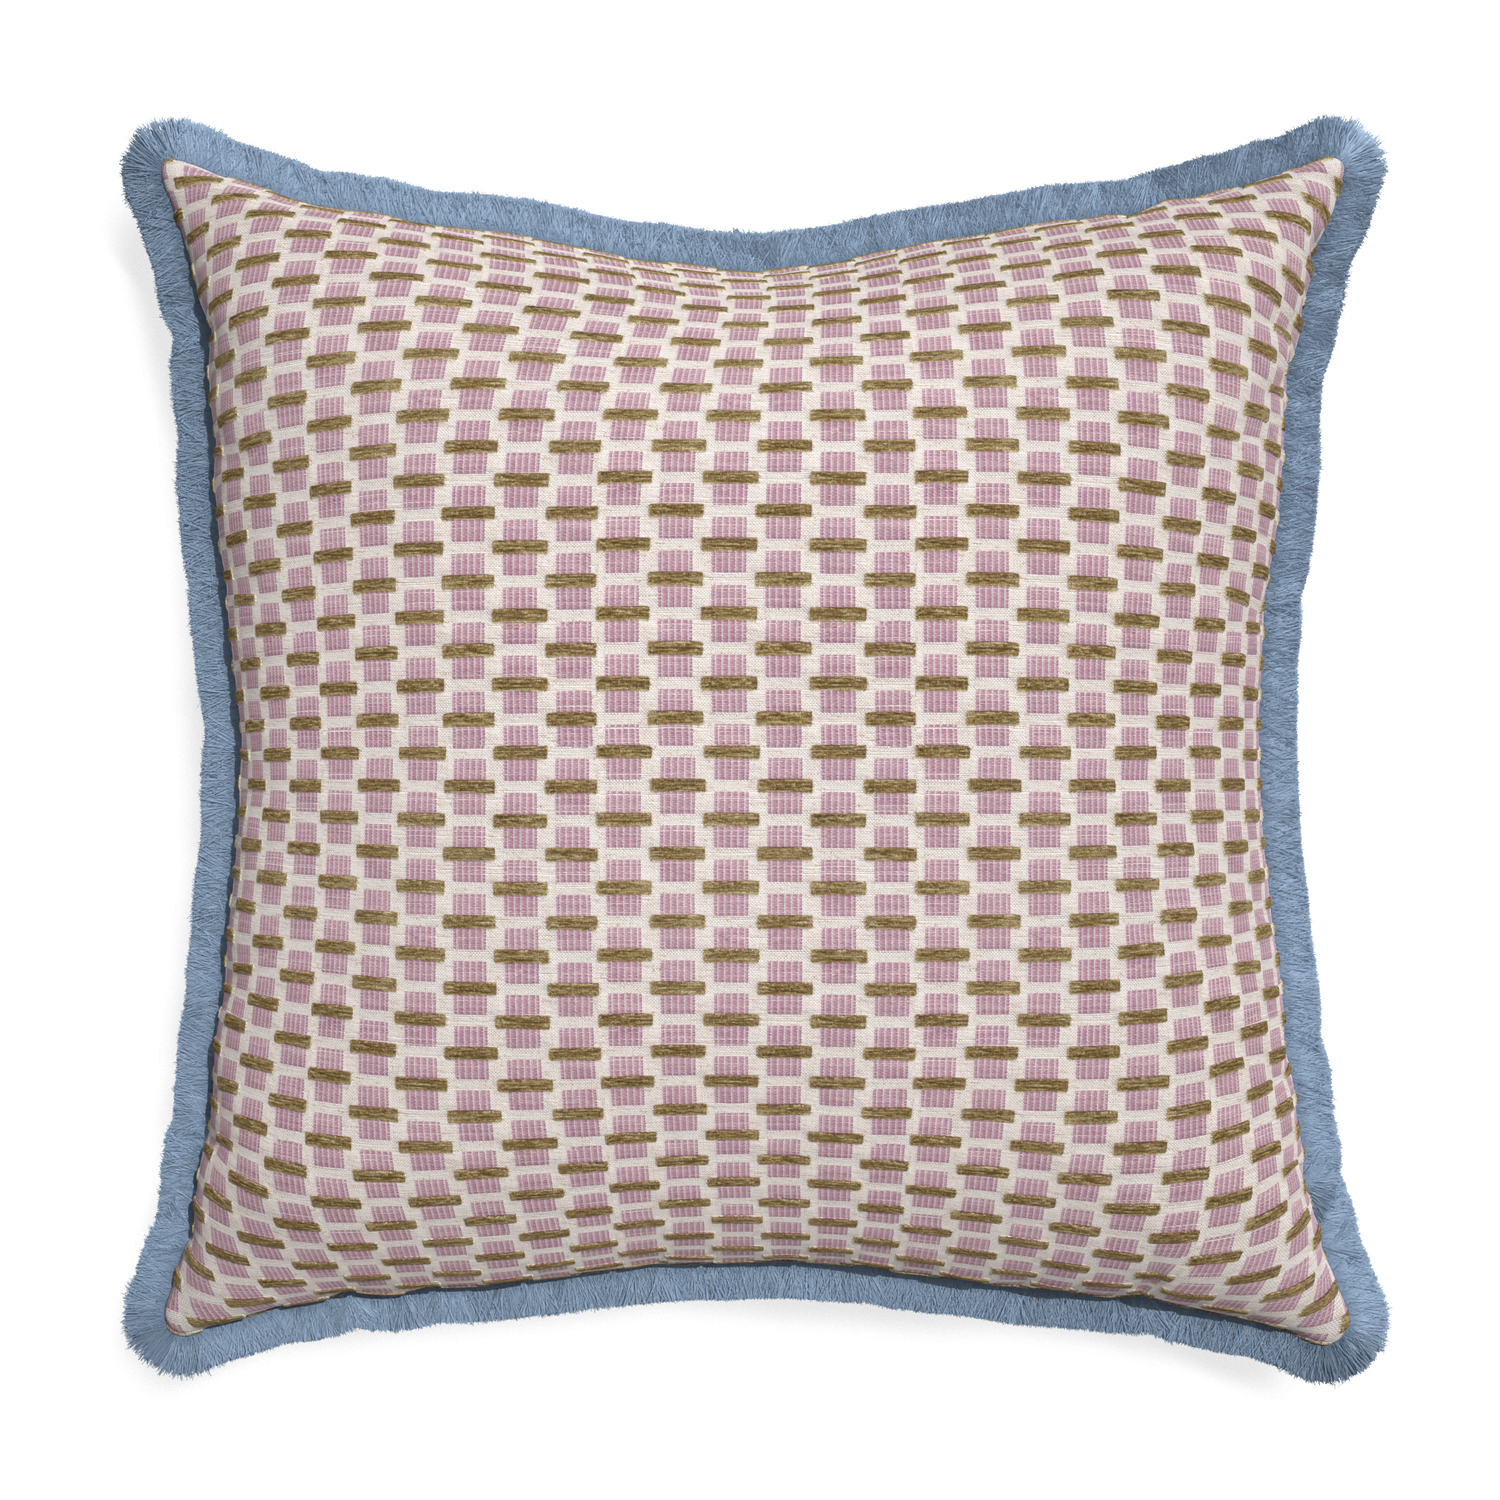 Euro-sham willow orchid custom pink geometric chenillepillow with sky fringe on white background